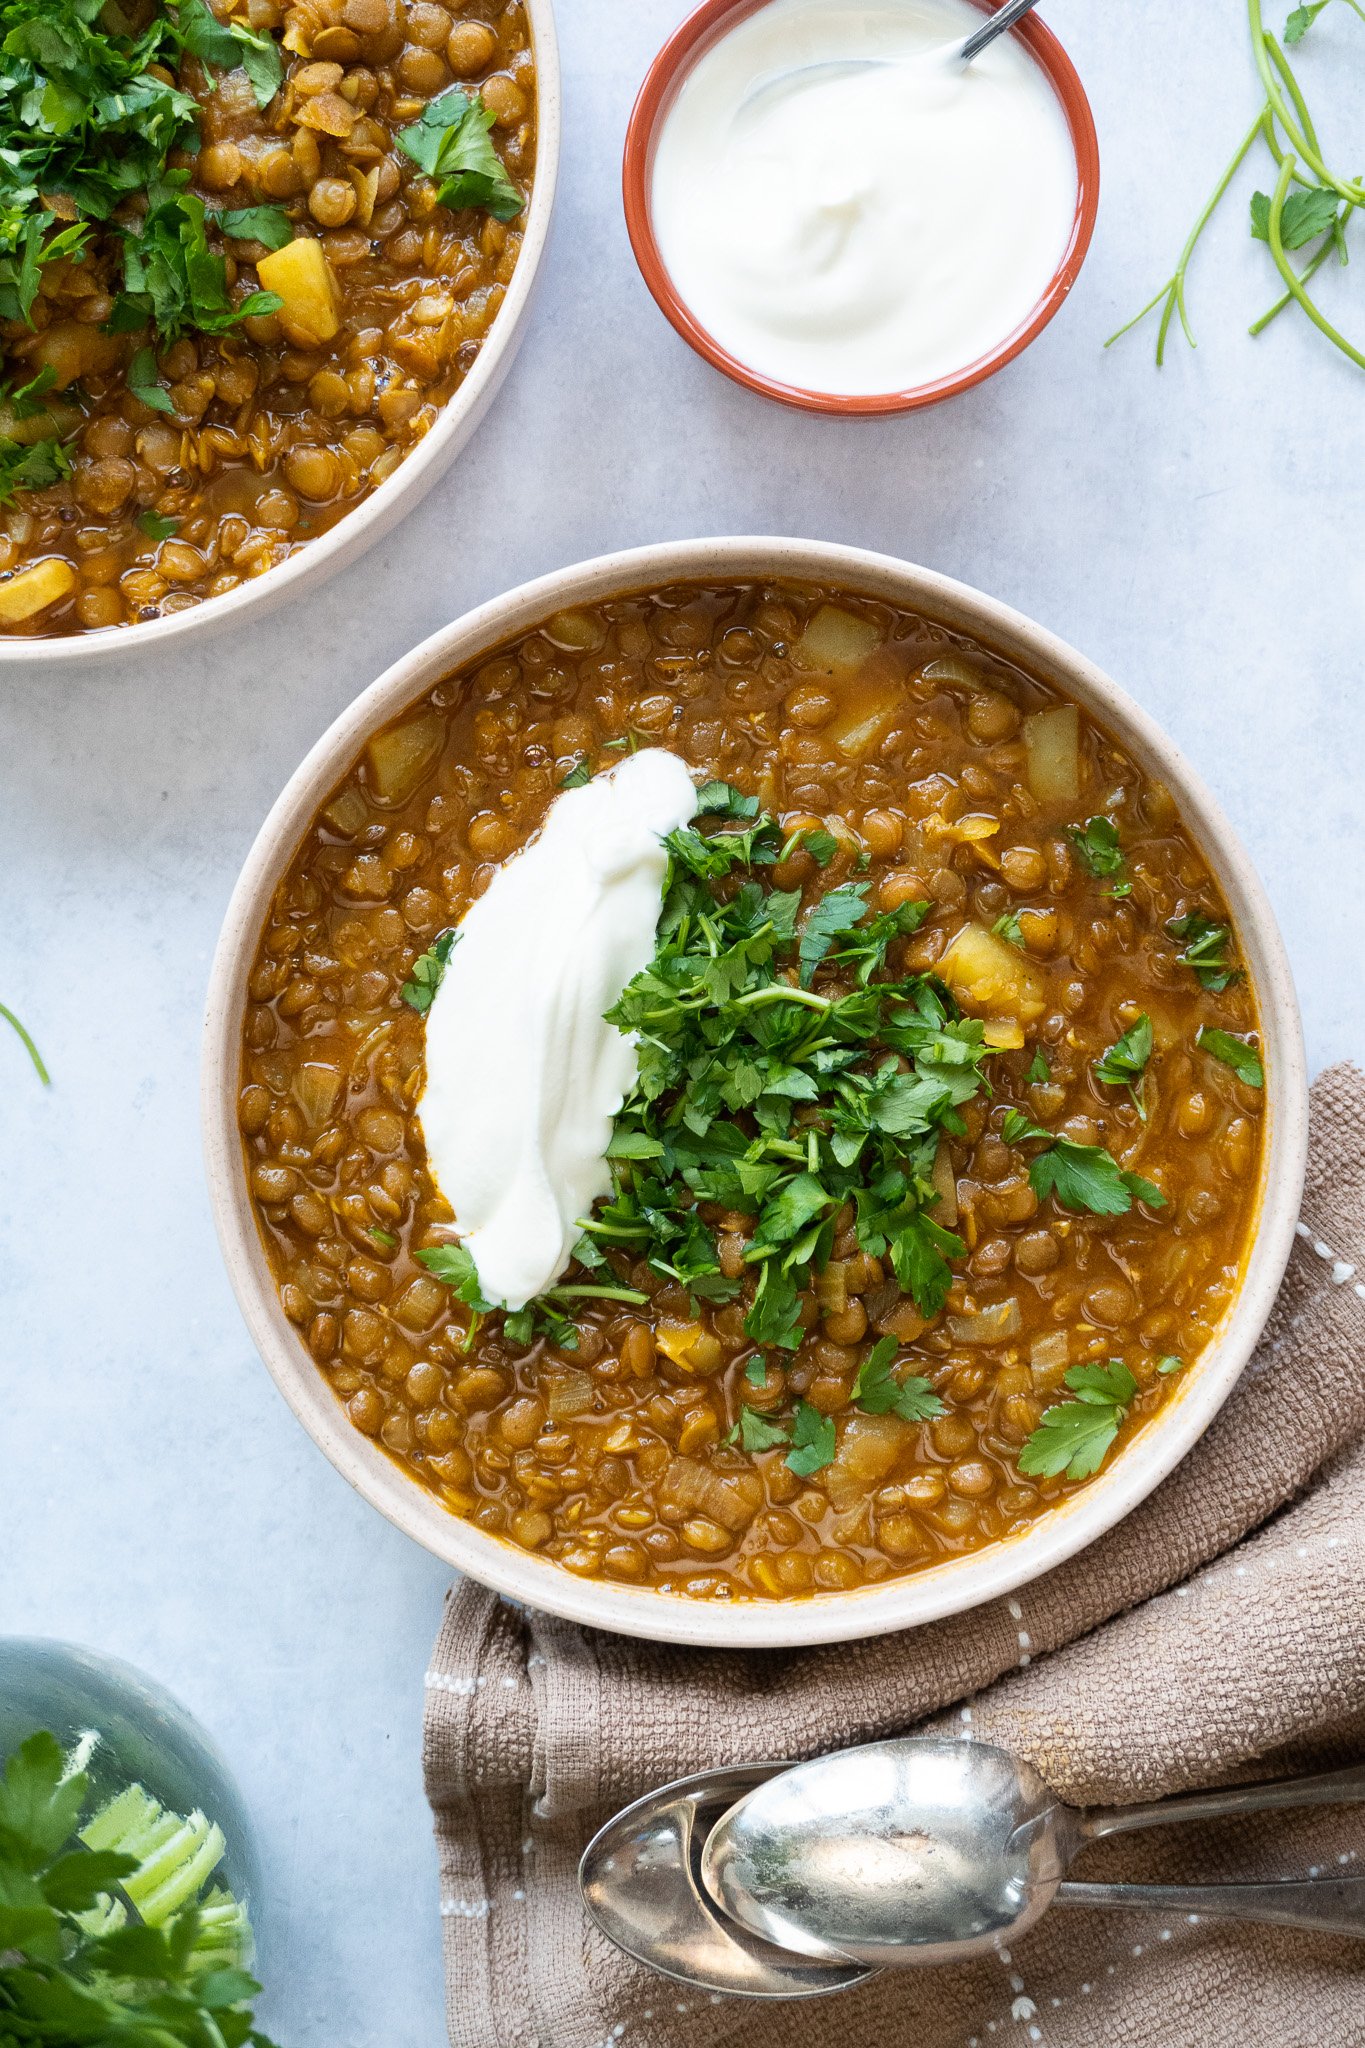 an aromatic bowl of Adasi Persian Lentil Soup, filled with tender lentils, chunks of potato, and infused with the warm flavors of cumin and coriander
